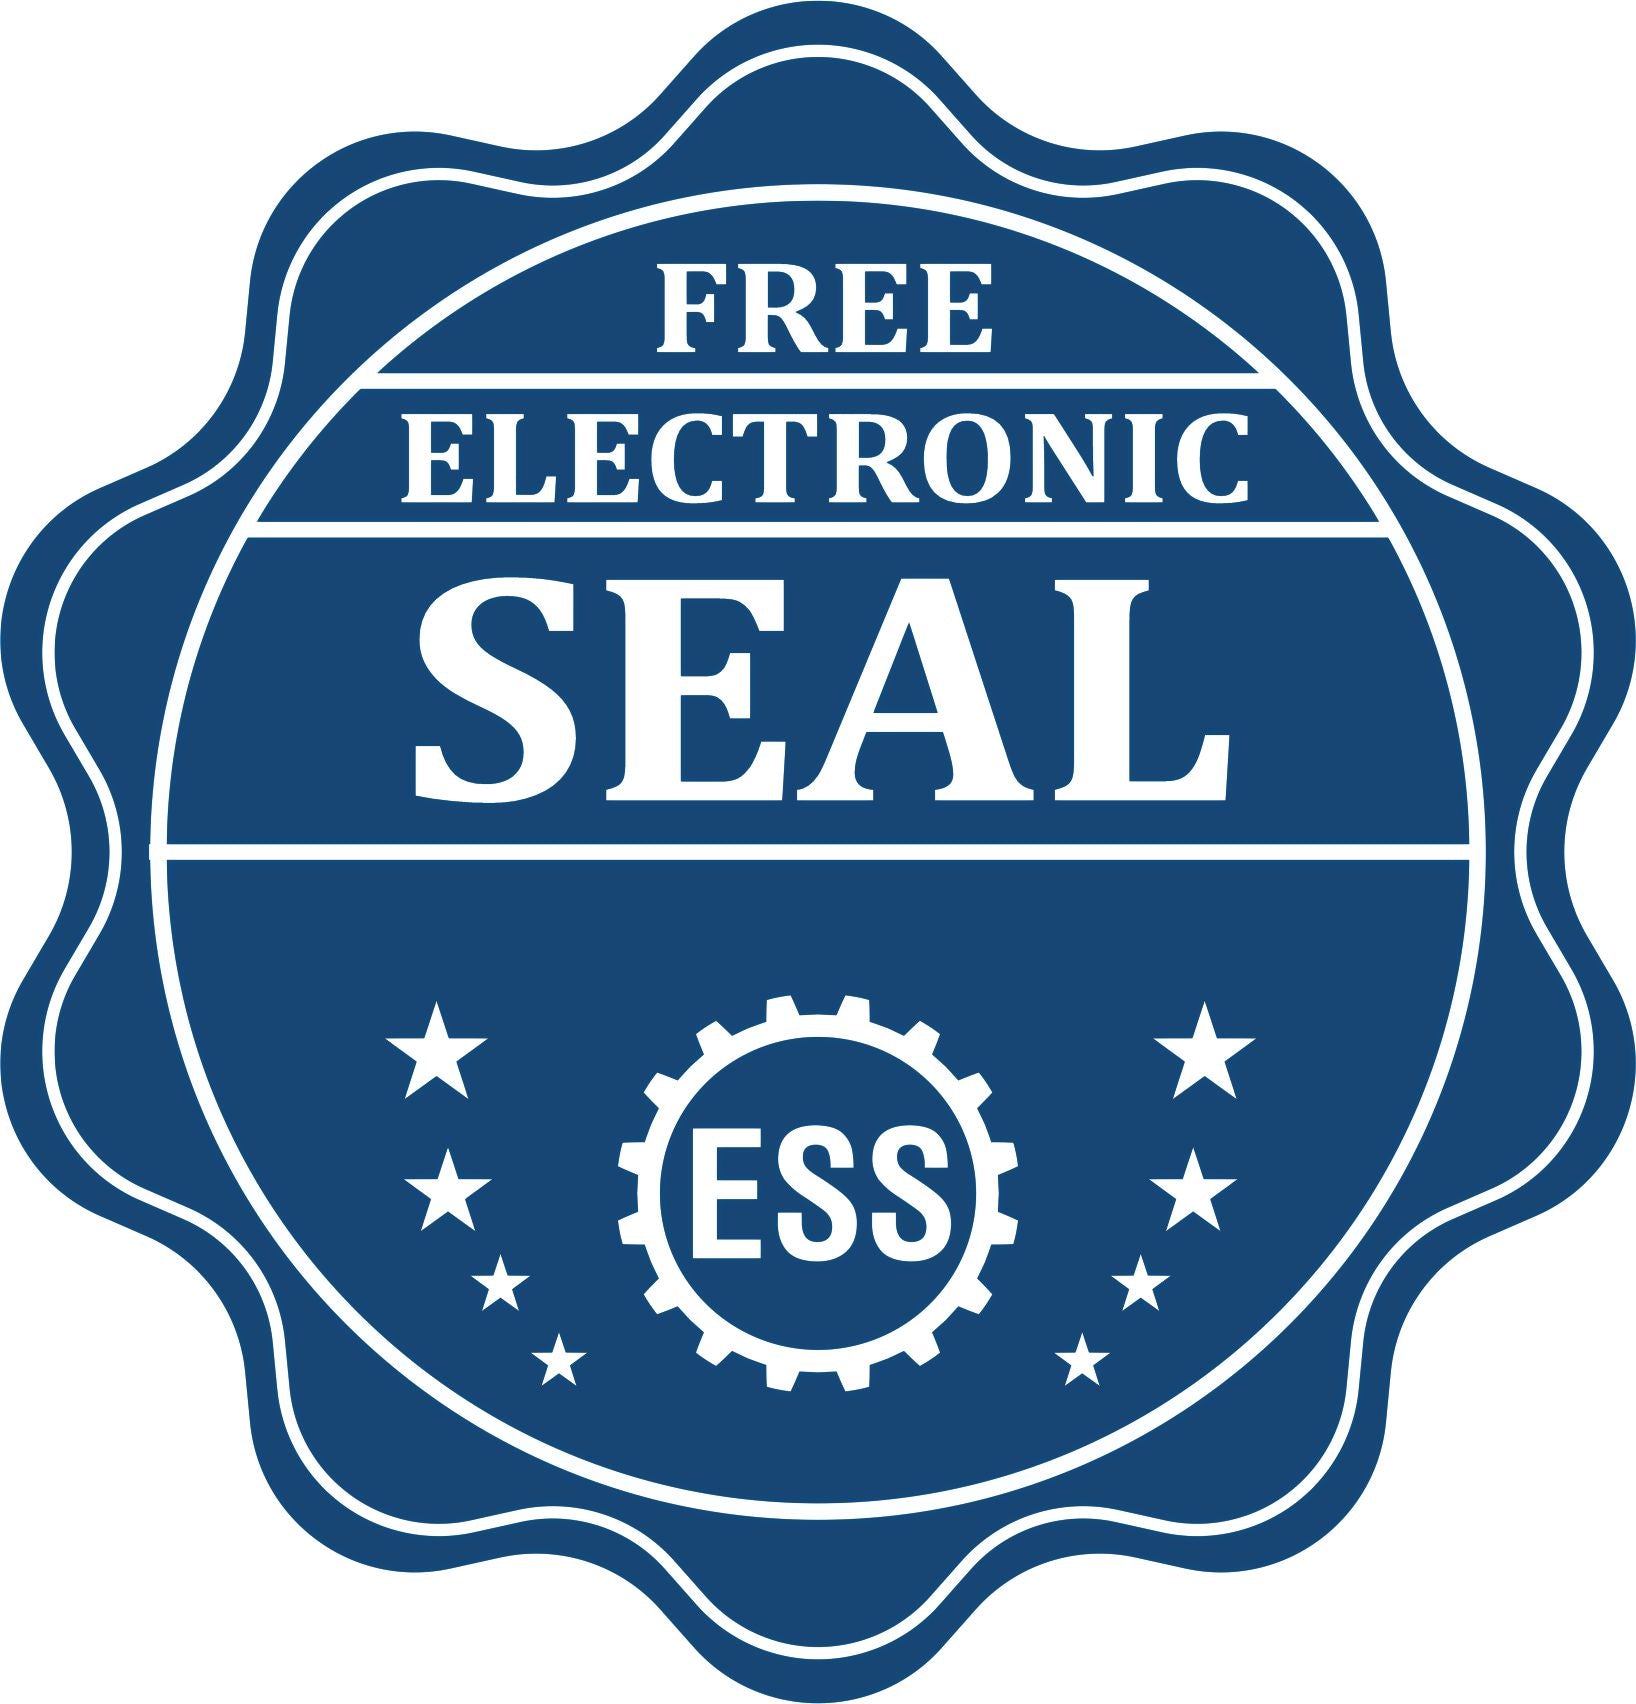 A badge showing a free electronic seal for the Long Reach Puerto Rico PE Seal with stars and the ESS gear on the emblem.